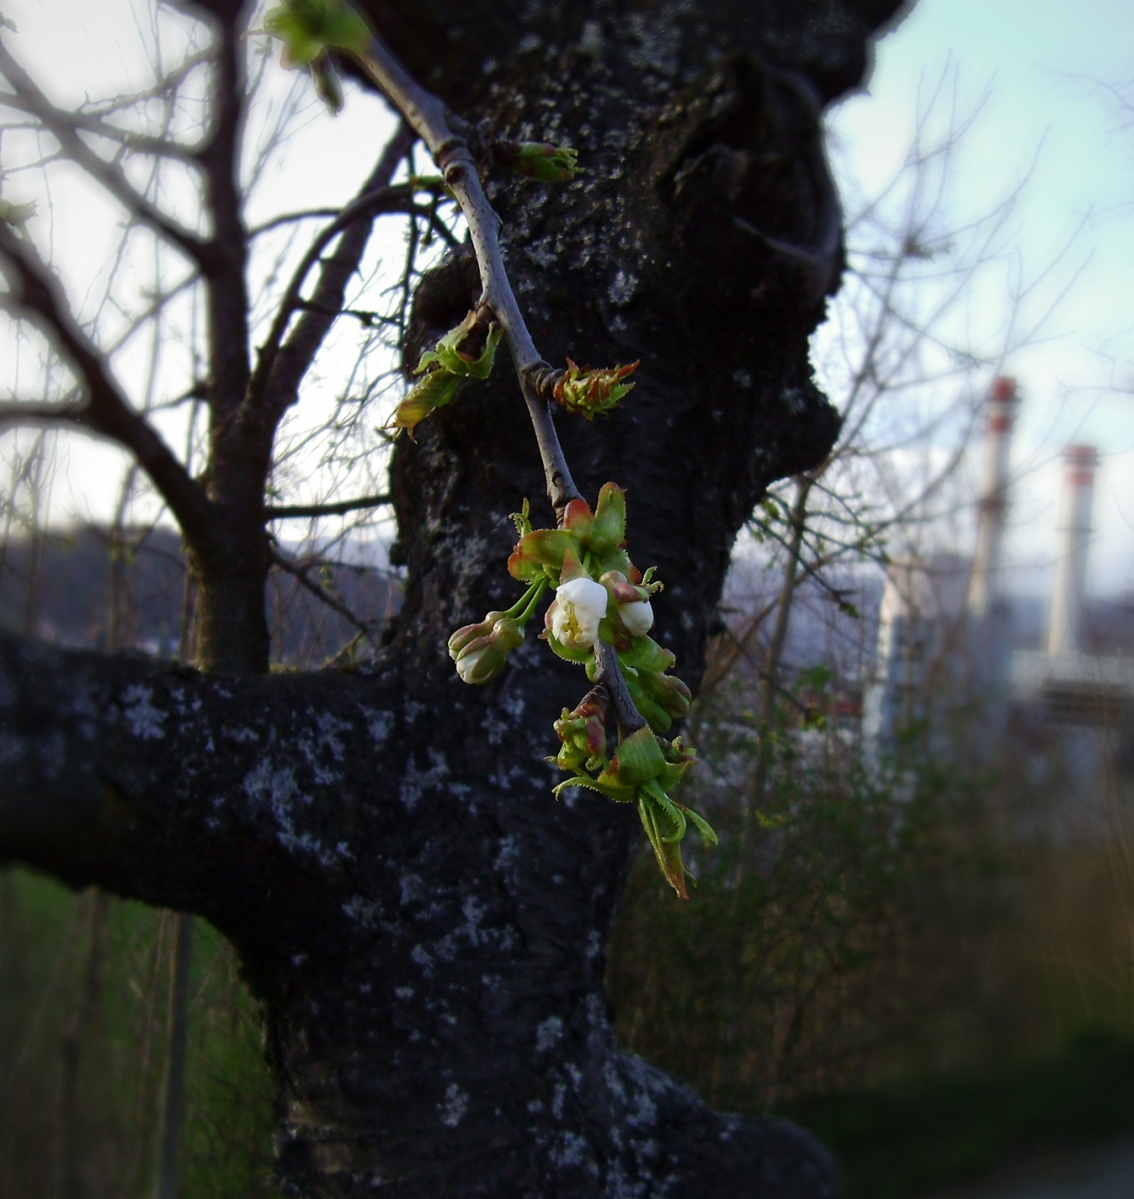 Apple blossoms with electric plant in background